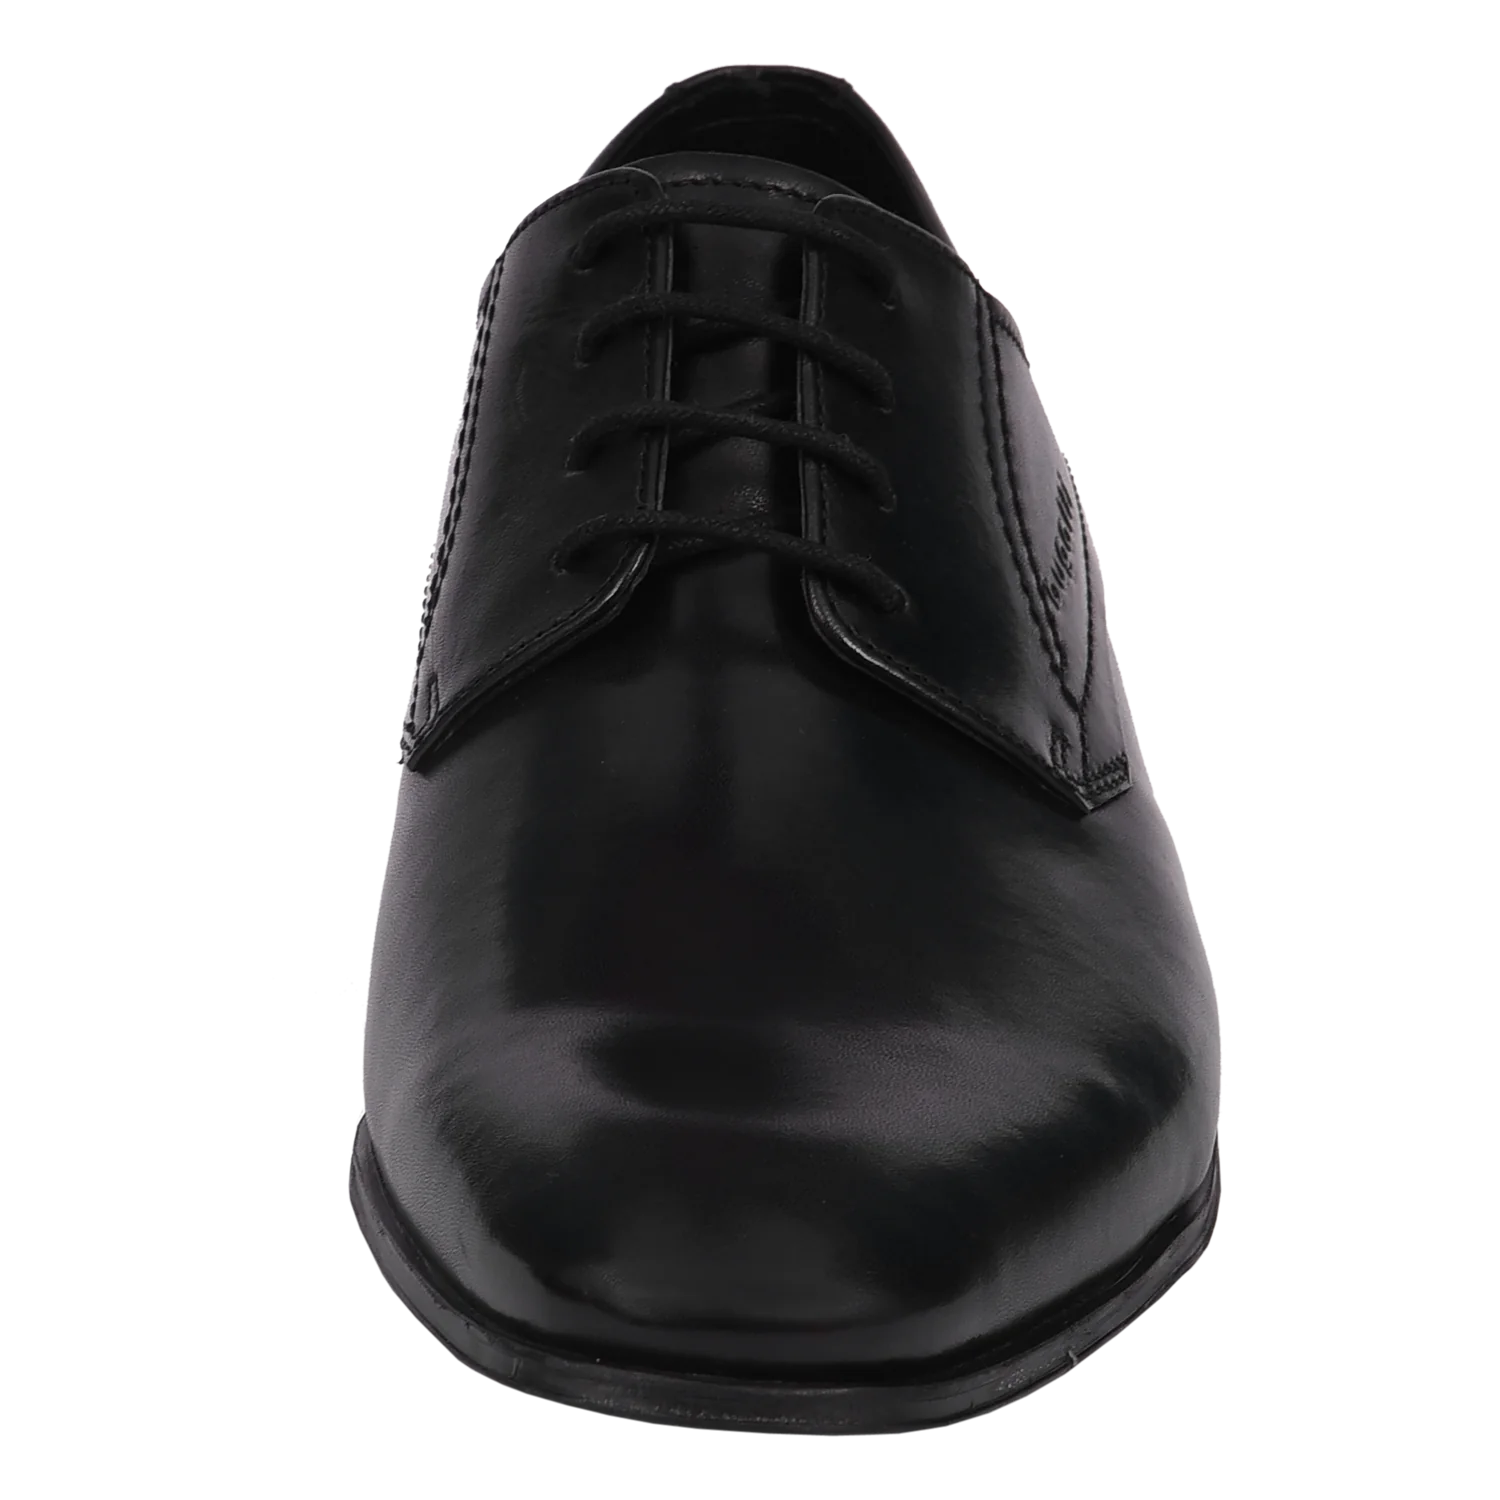 Detailed view of the high-quality plastic sole for durability.